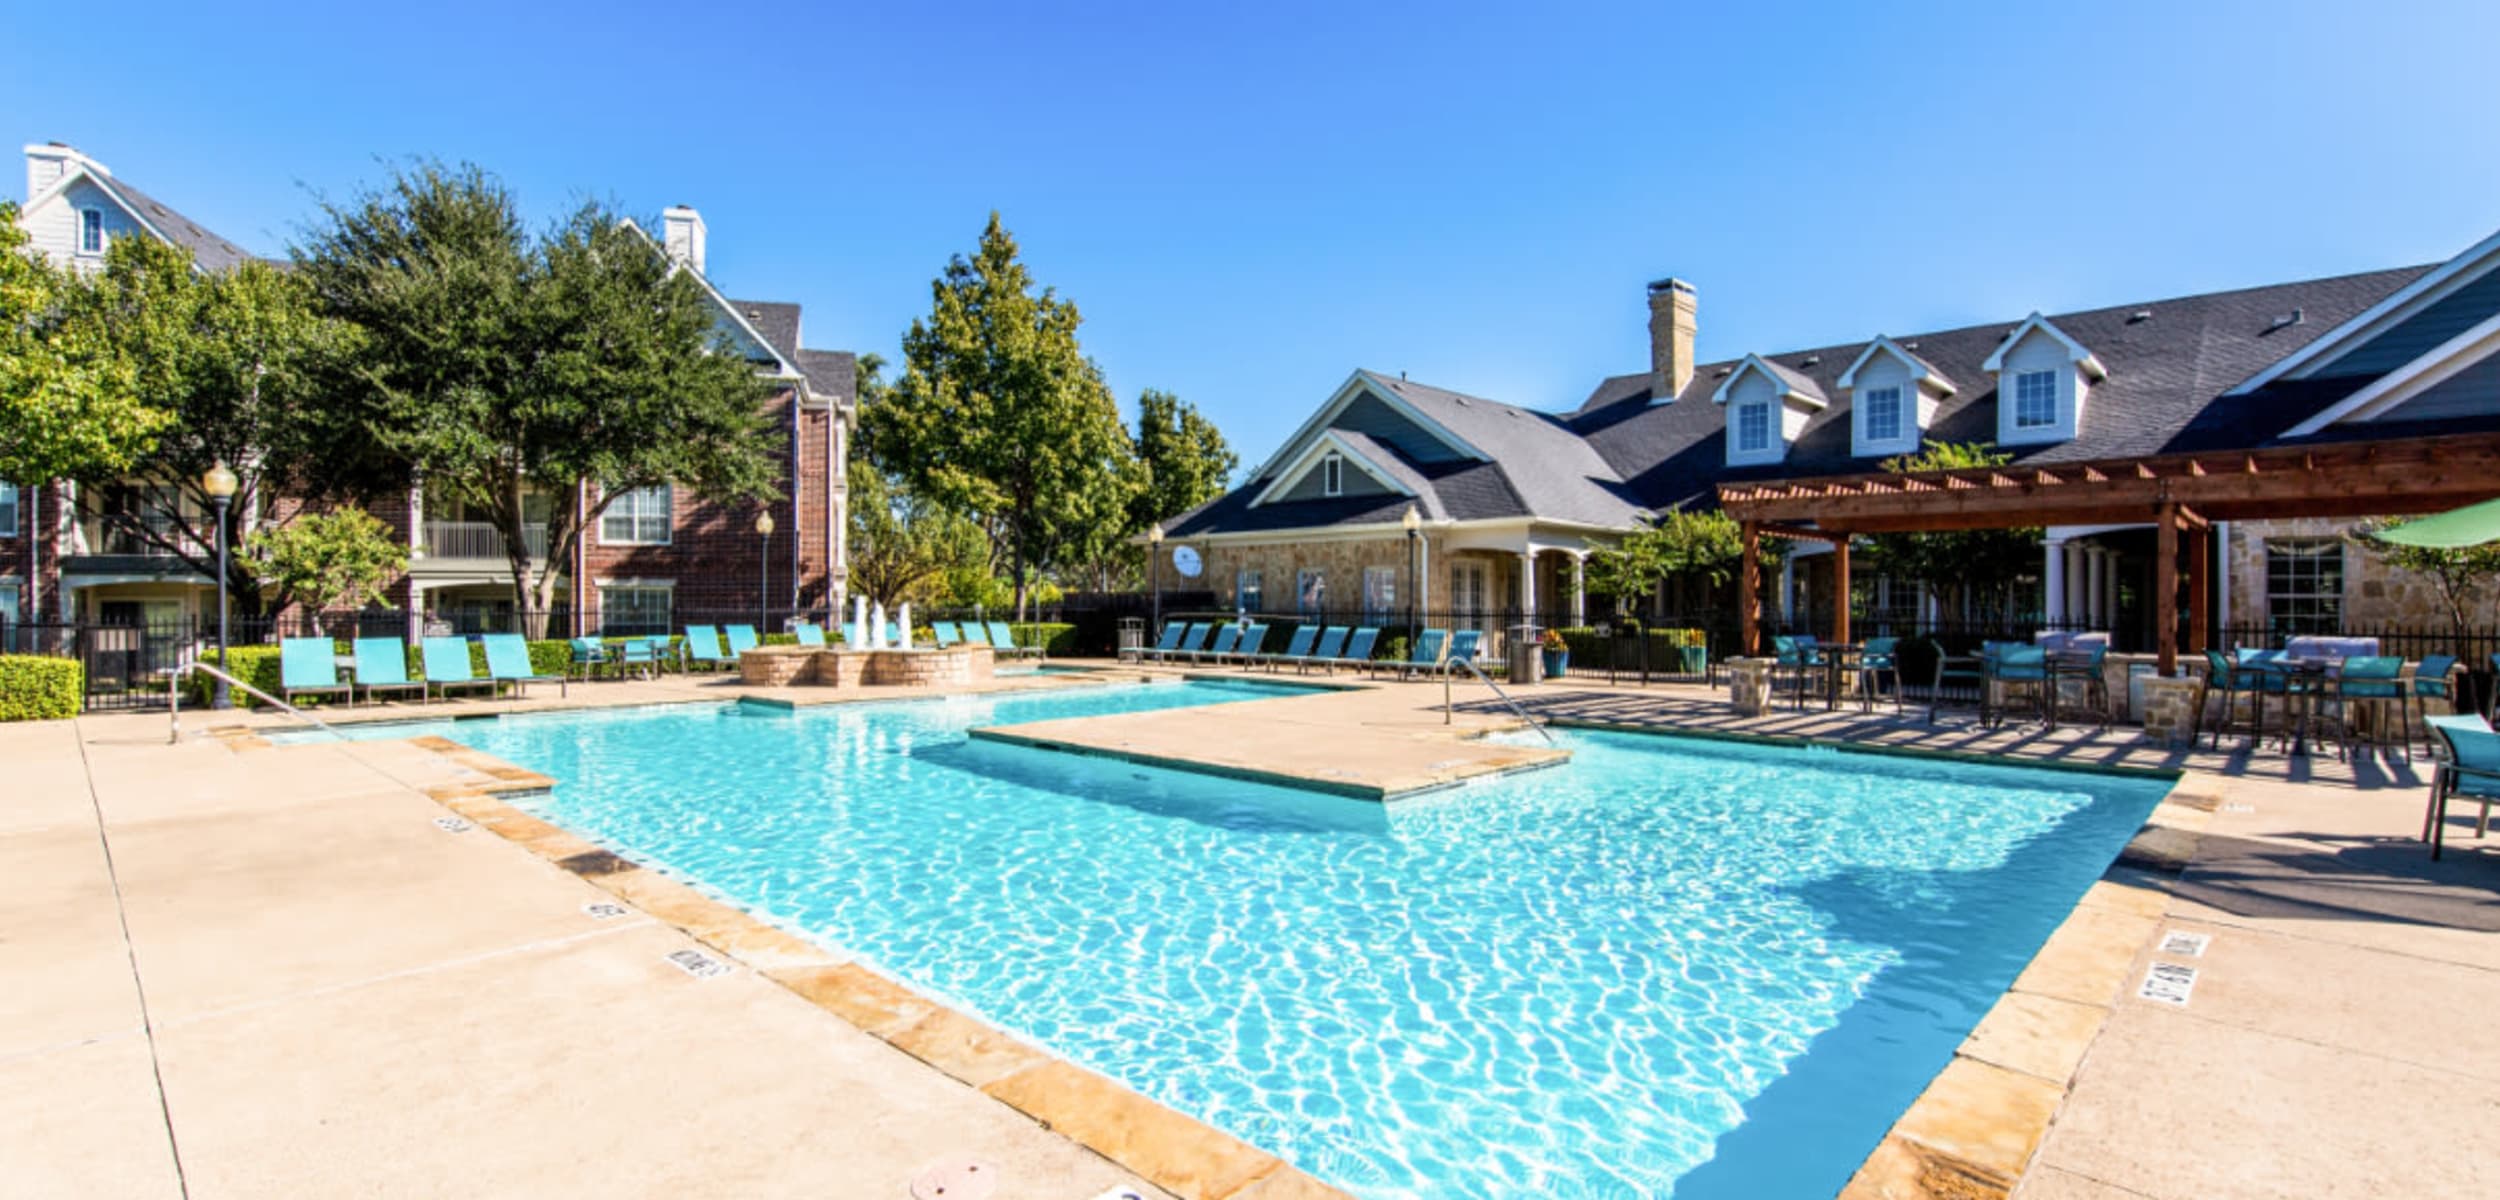 Sparkling pool surrounded by lounge chairs and gazebo area at Marquis at Silver Oaks in Grapevine, Texas